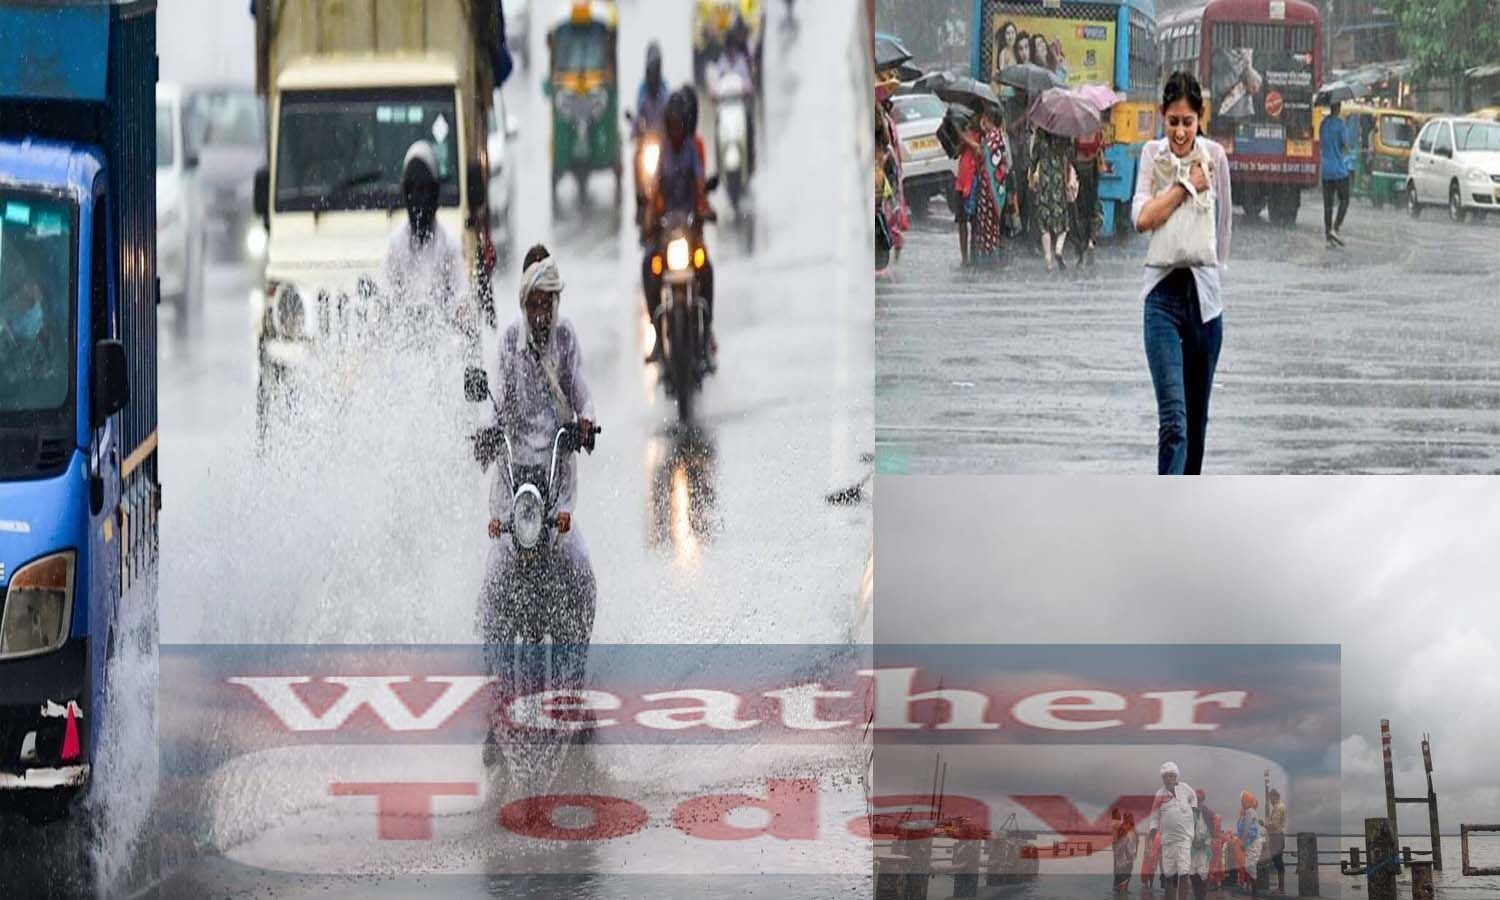 Weather Today: Heavy rain alert even today, Monsoon kind in Delhi and Uttarakhand too